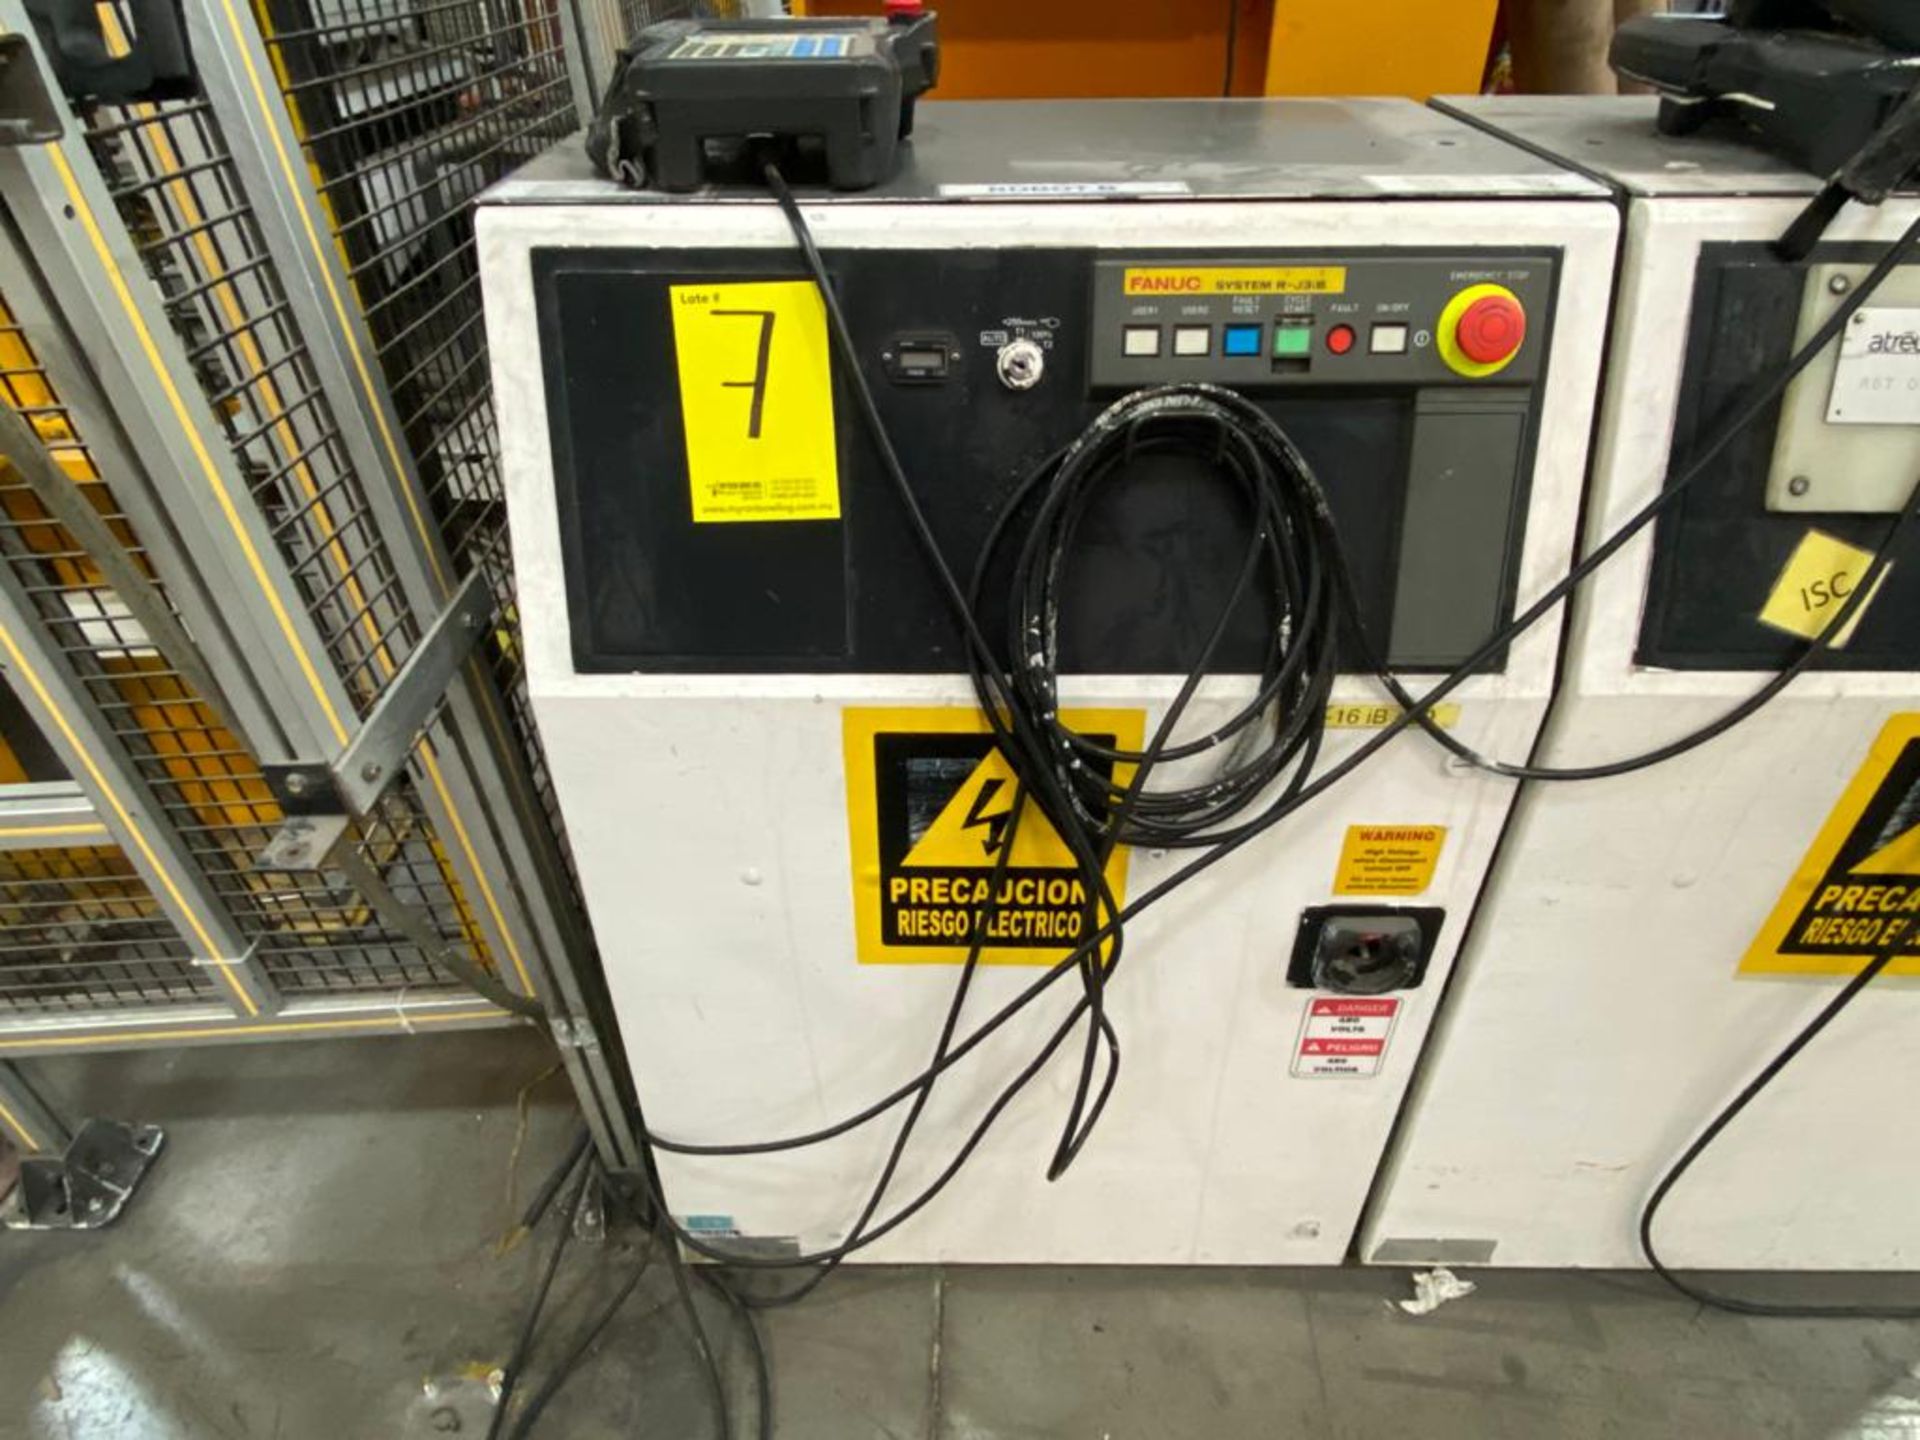 Fanuc articulated Robot, model M-16iB/20 - Image 27 of 27